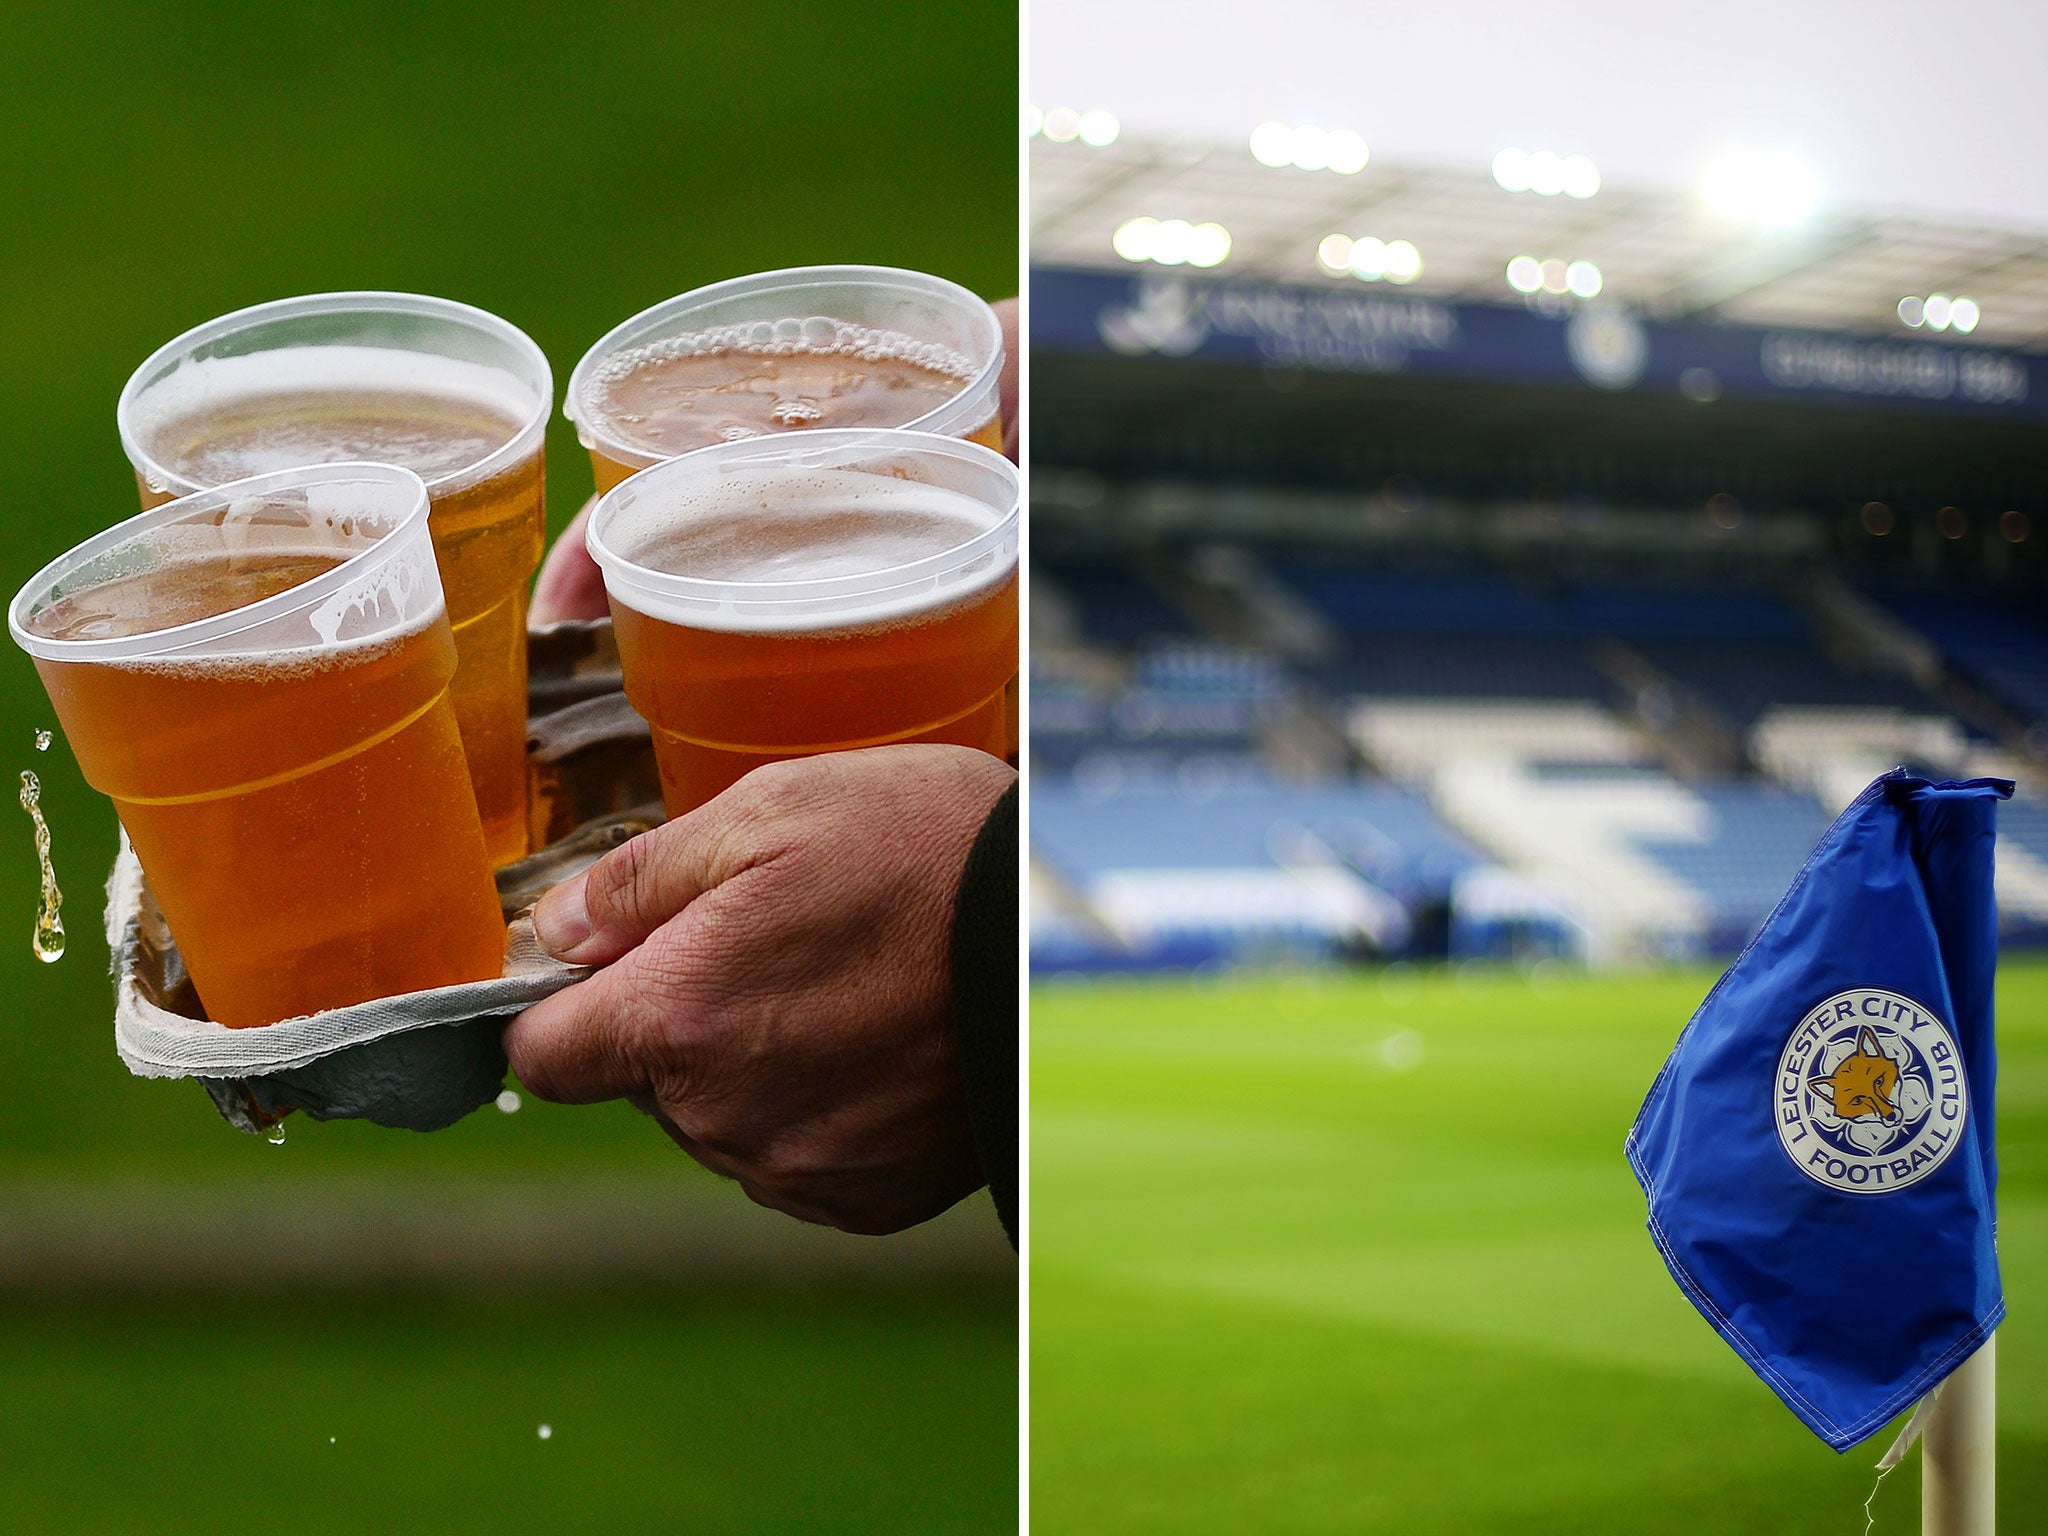 Leicester City will give fans a free beer to thank them for their support